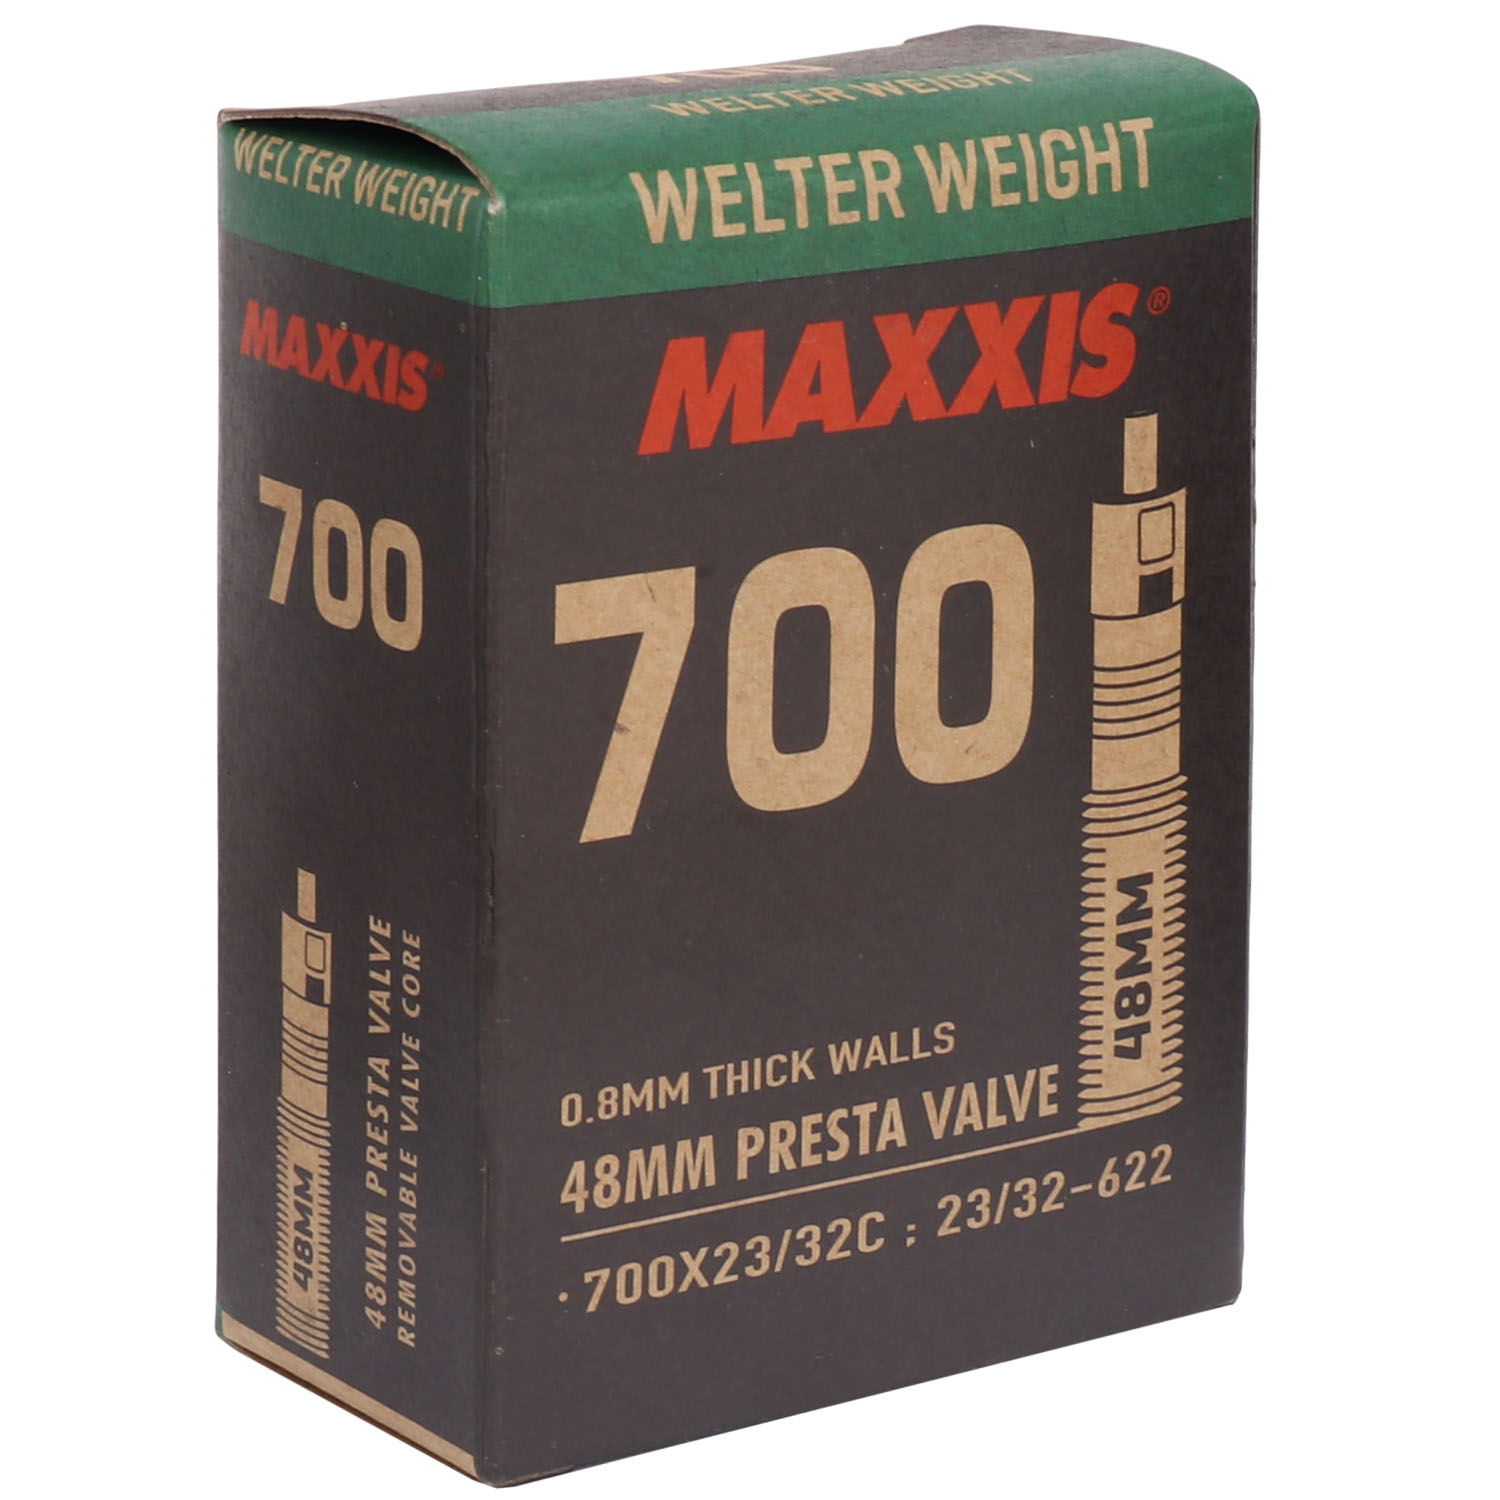 Picture of Maxxis WelterWeight Road Tube - 700x23/32C - Presta - 48mm